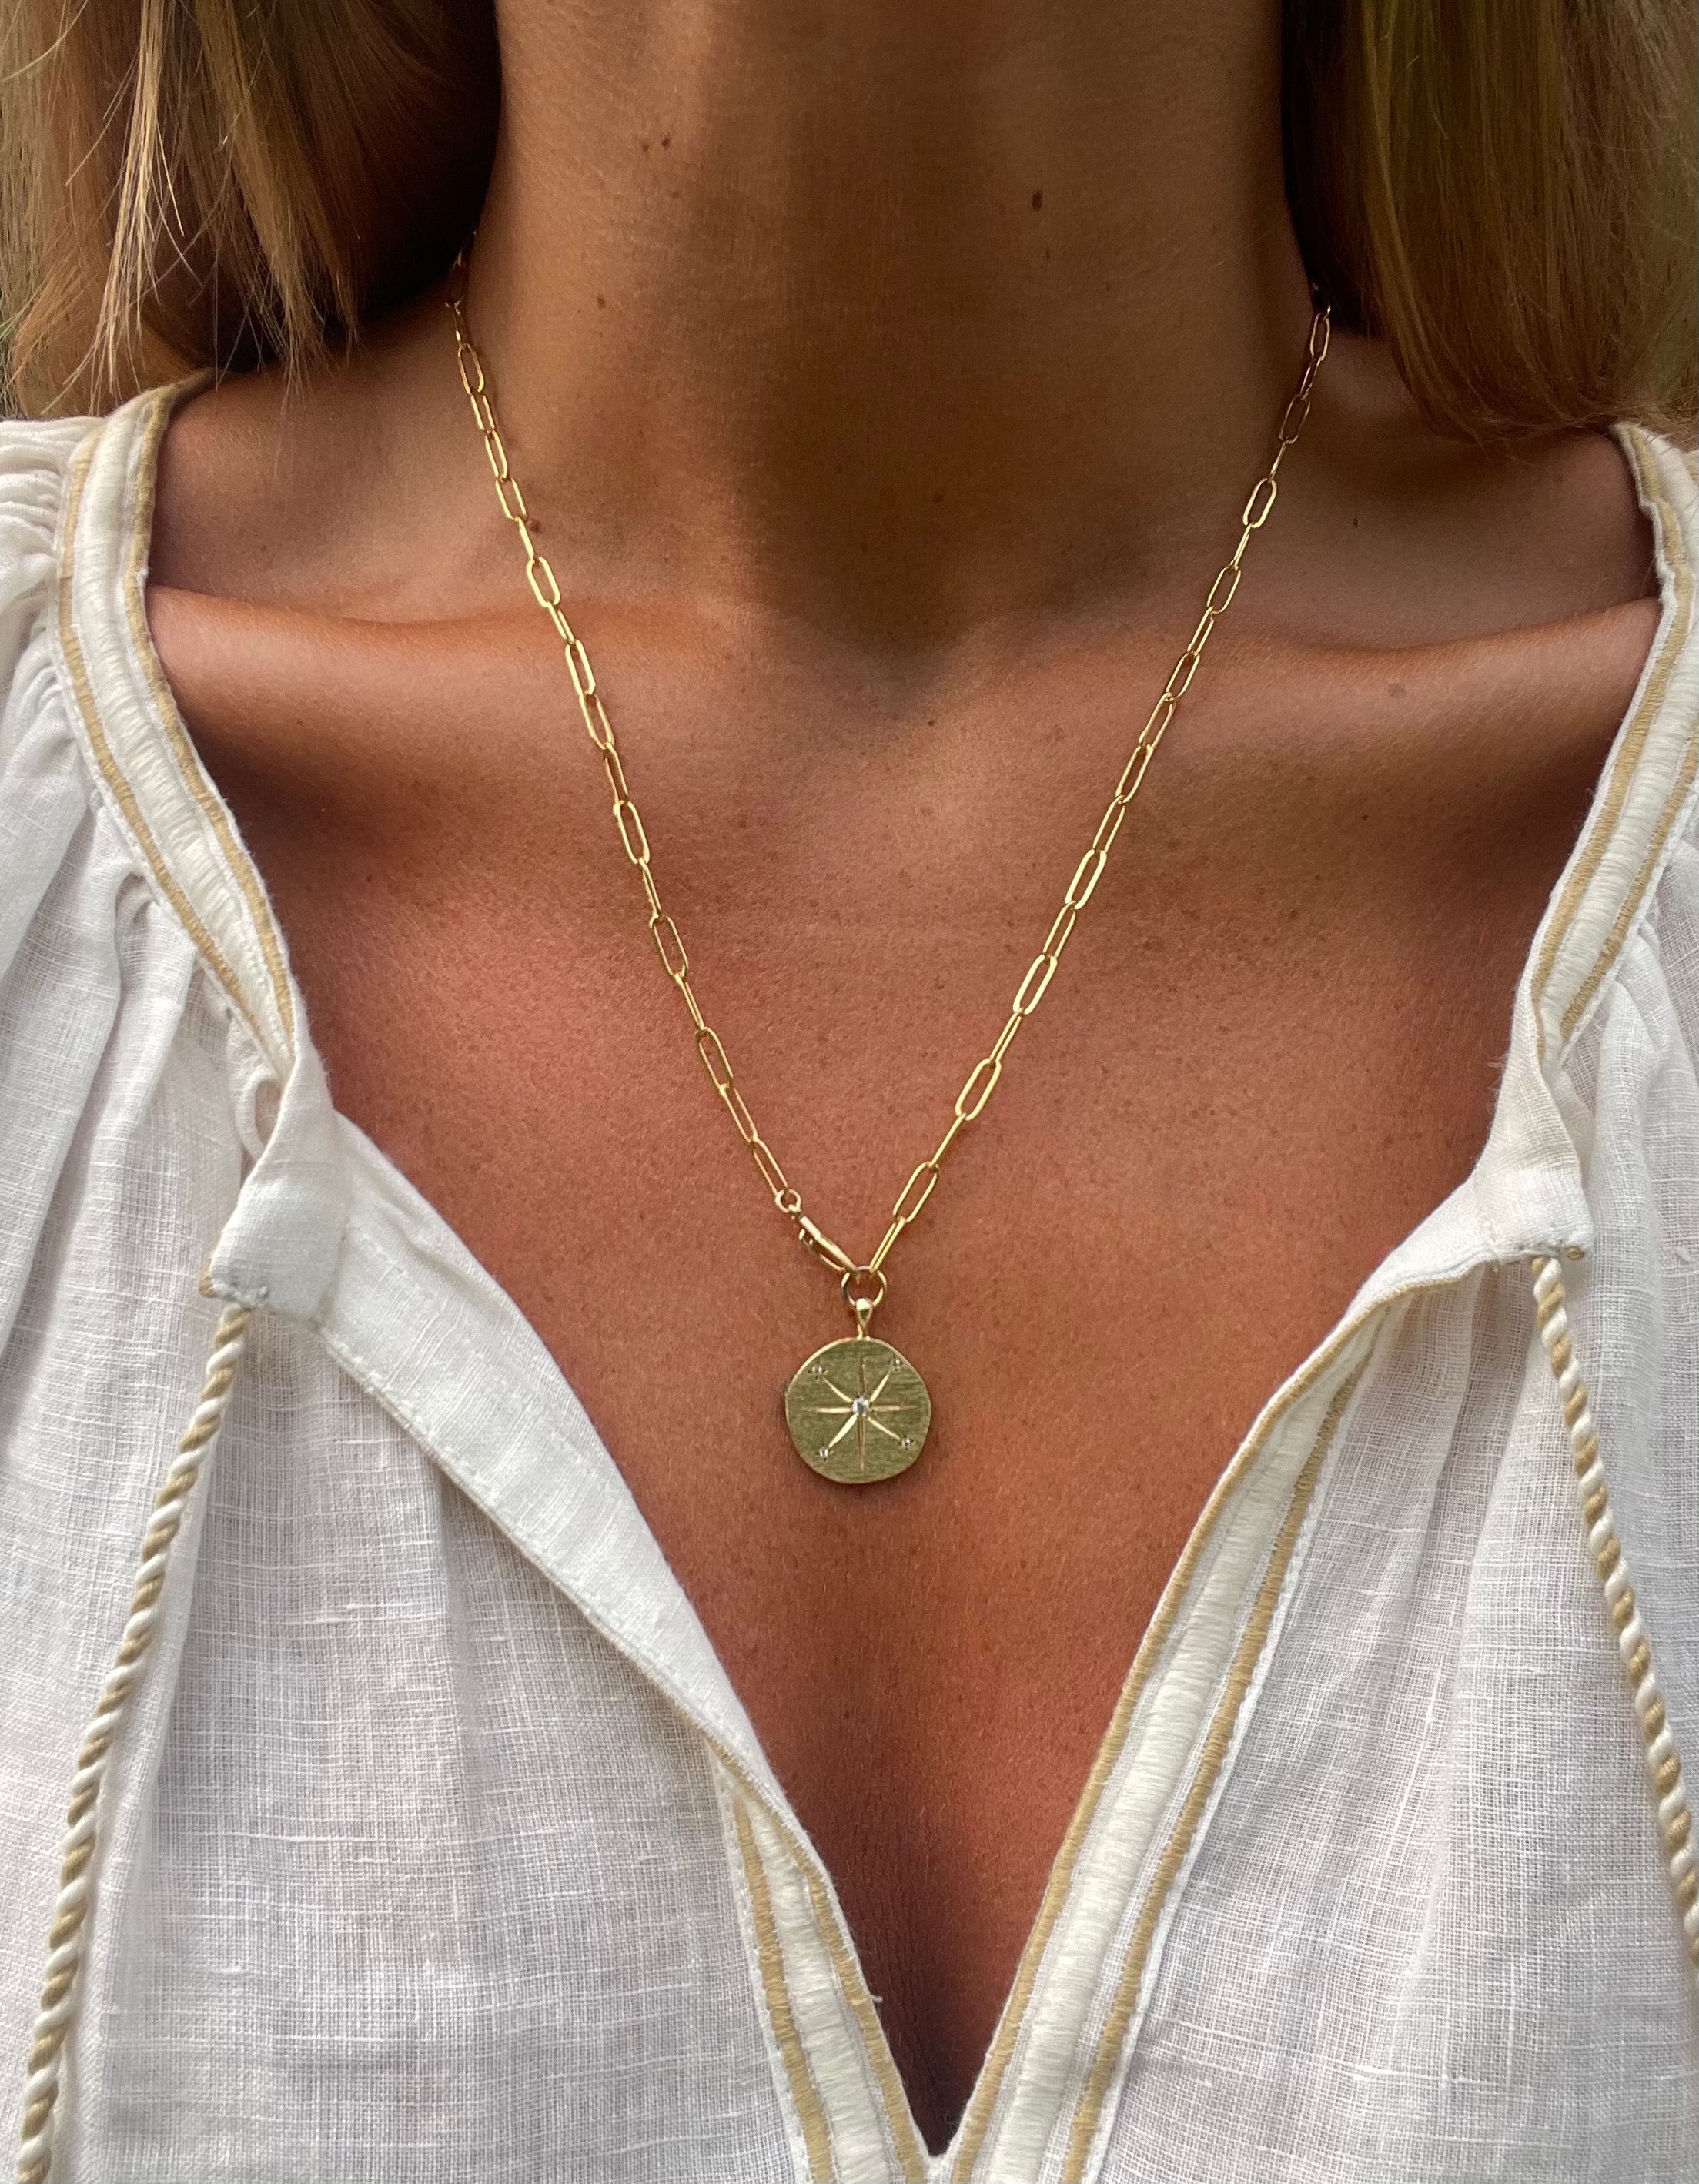 gold link chain necklace with sun medallion the falcon necklace neo medallion hanka in